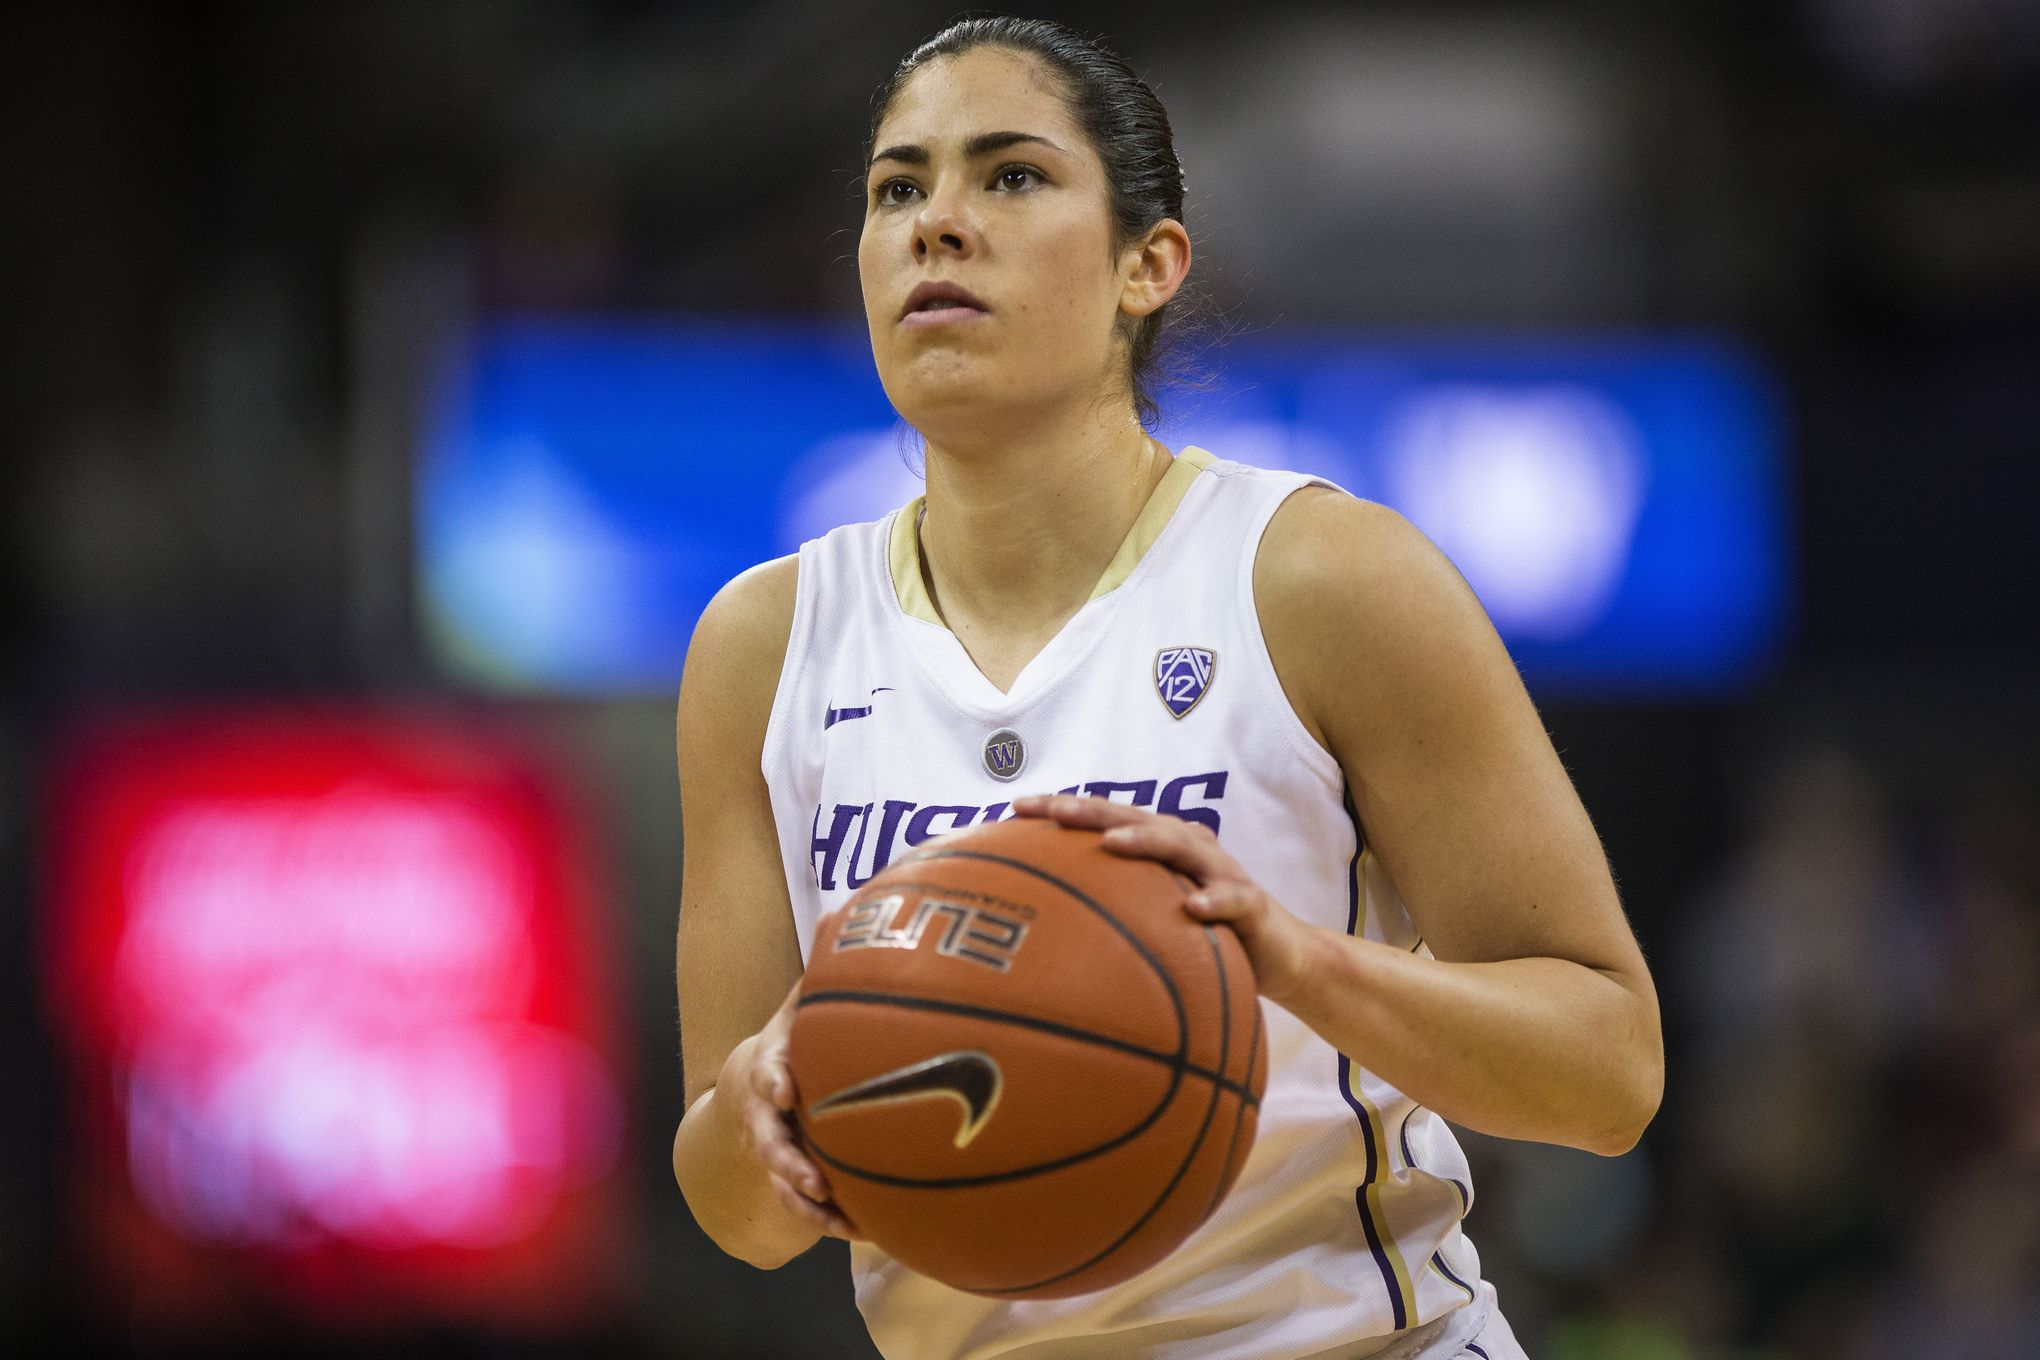 Kelsey Plum Kids And Partner: Who Are They?